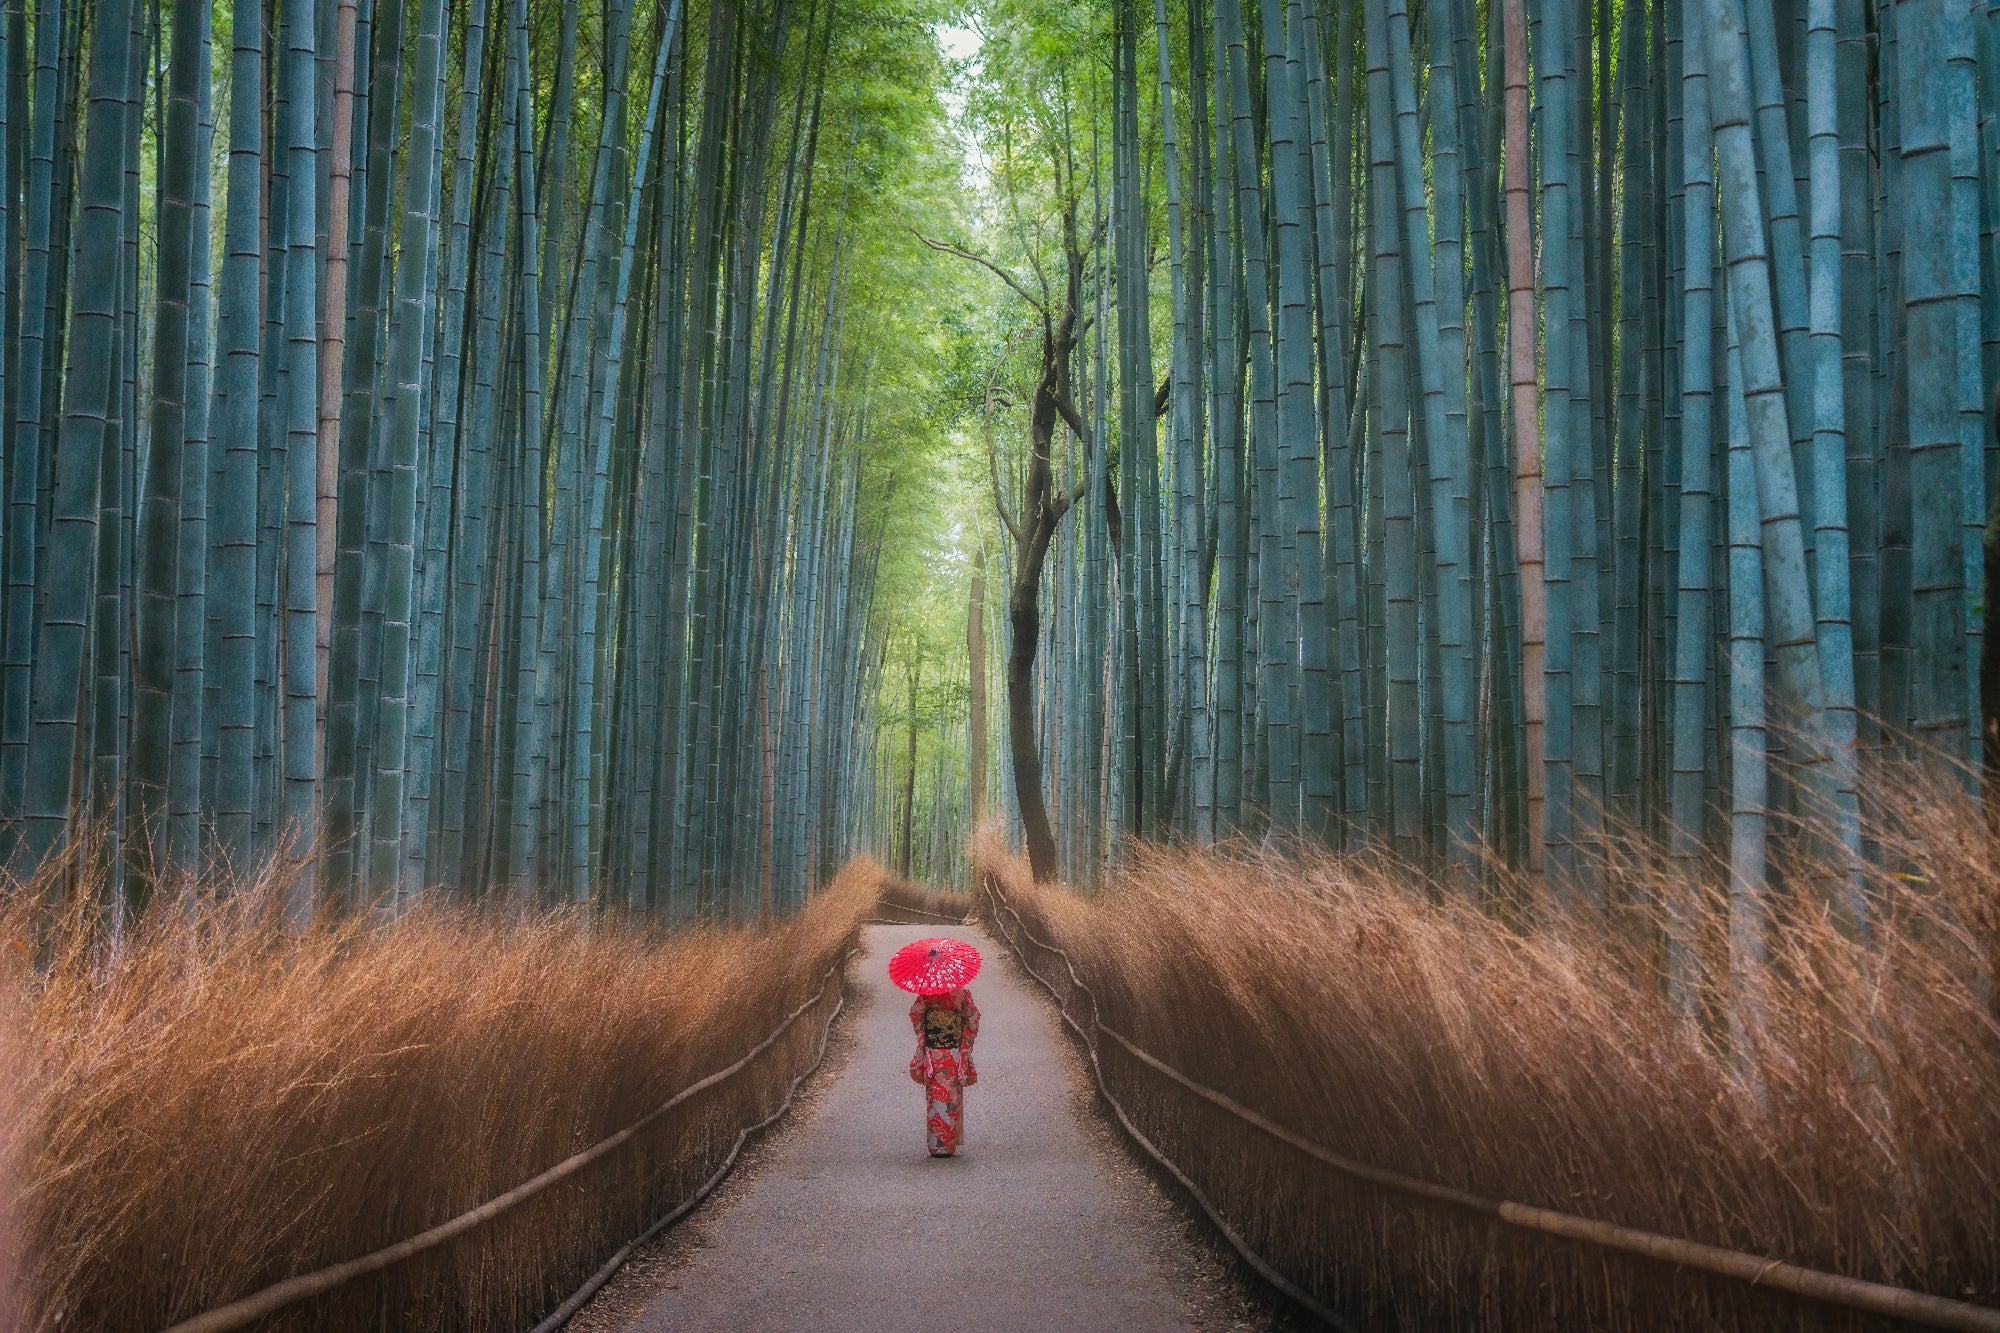 Wanderer in the Bamboo Woods featured opacity image